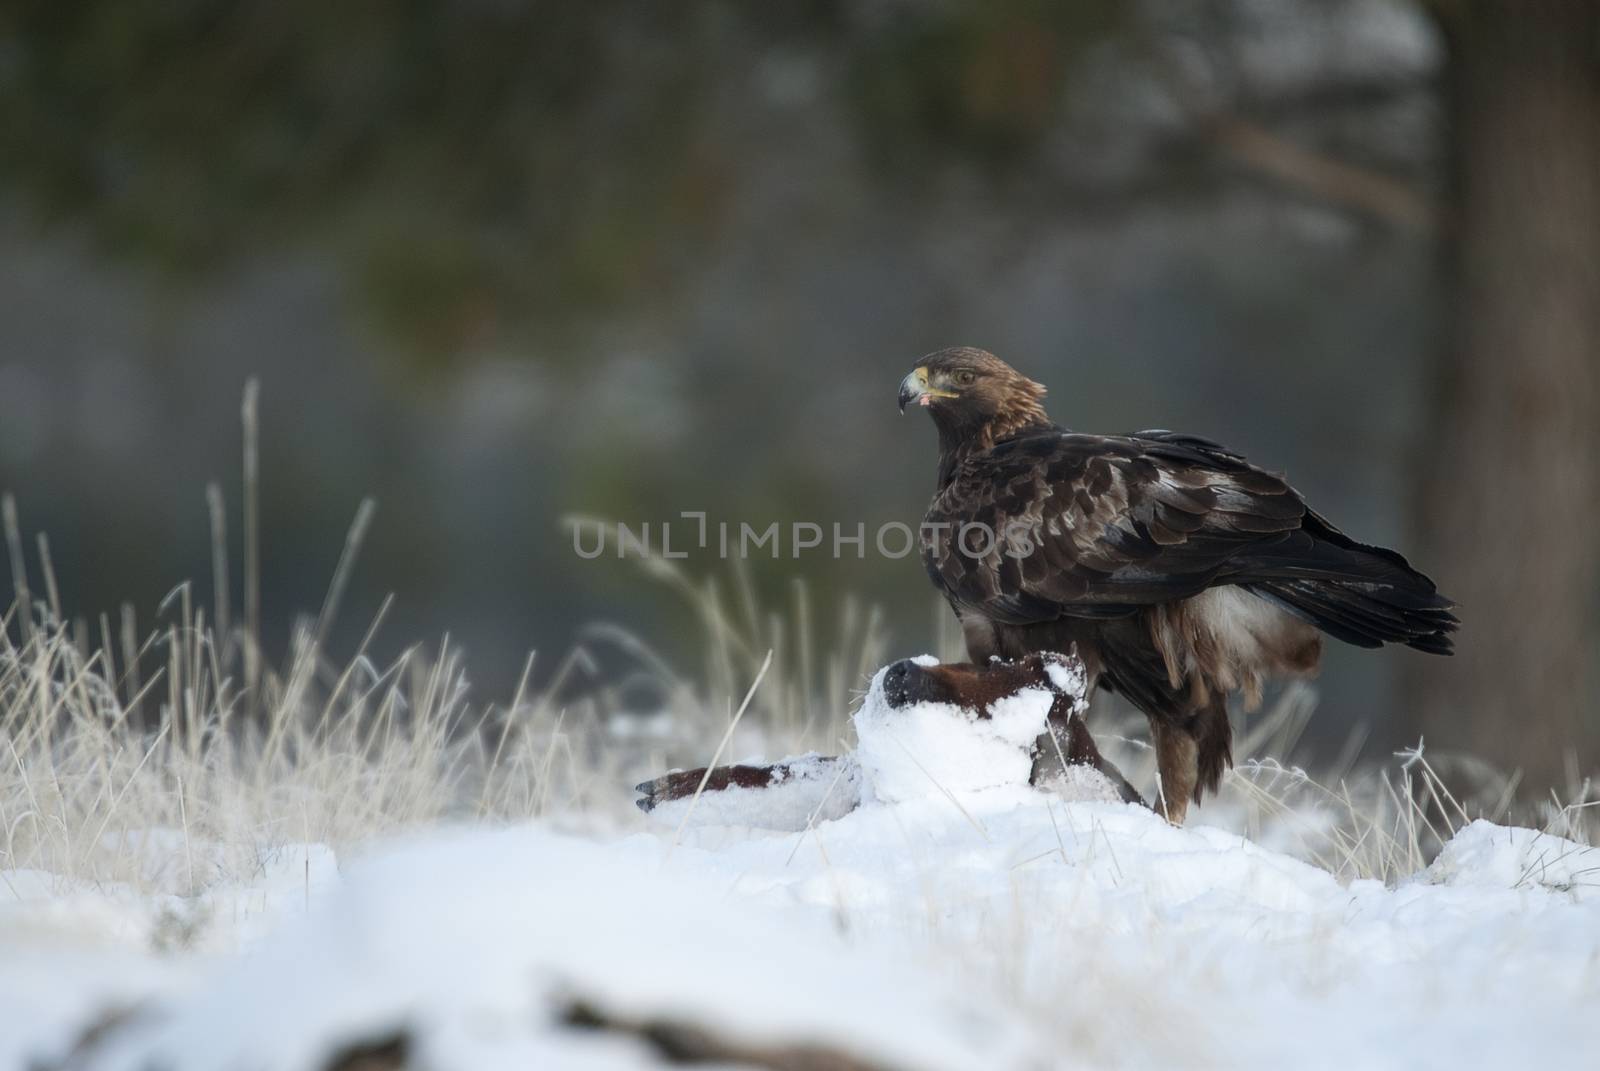 golden eagle (Aquila chrysaetos), in the snow eating carola from by jalonsohu@gmail.com